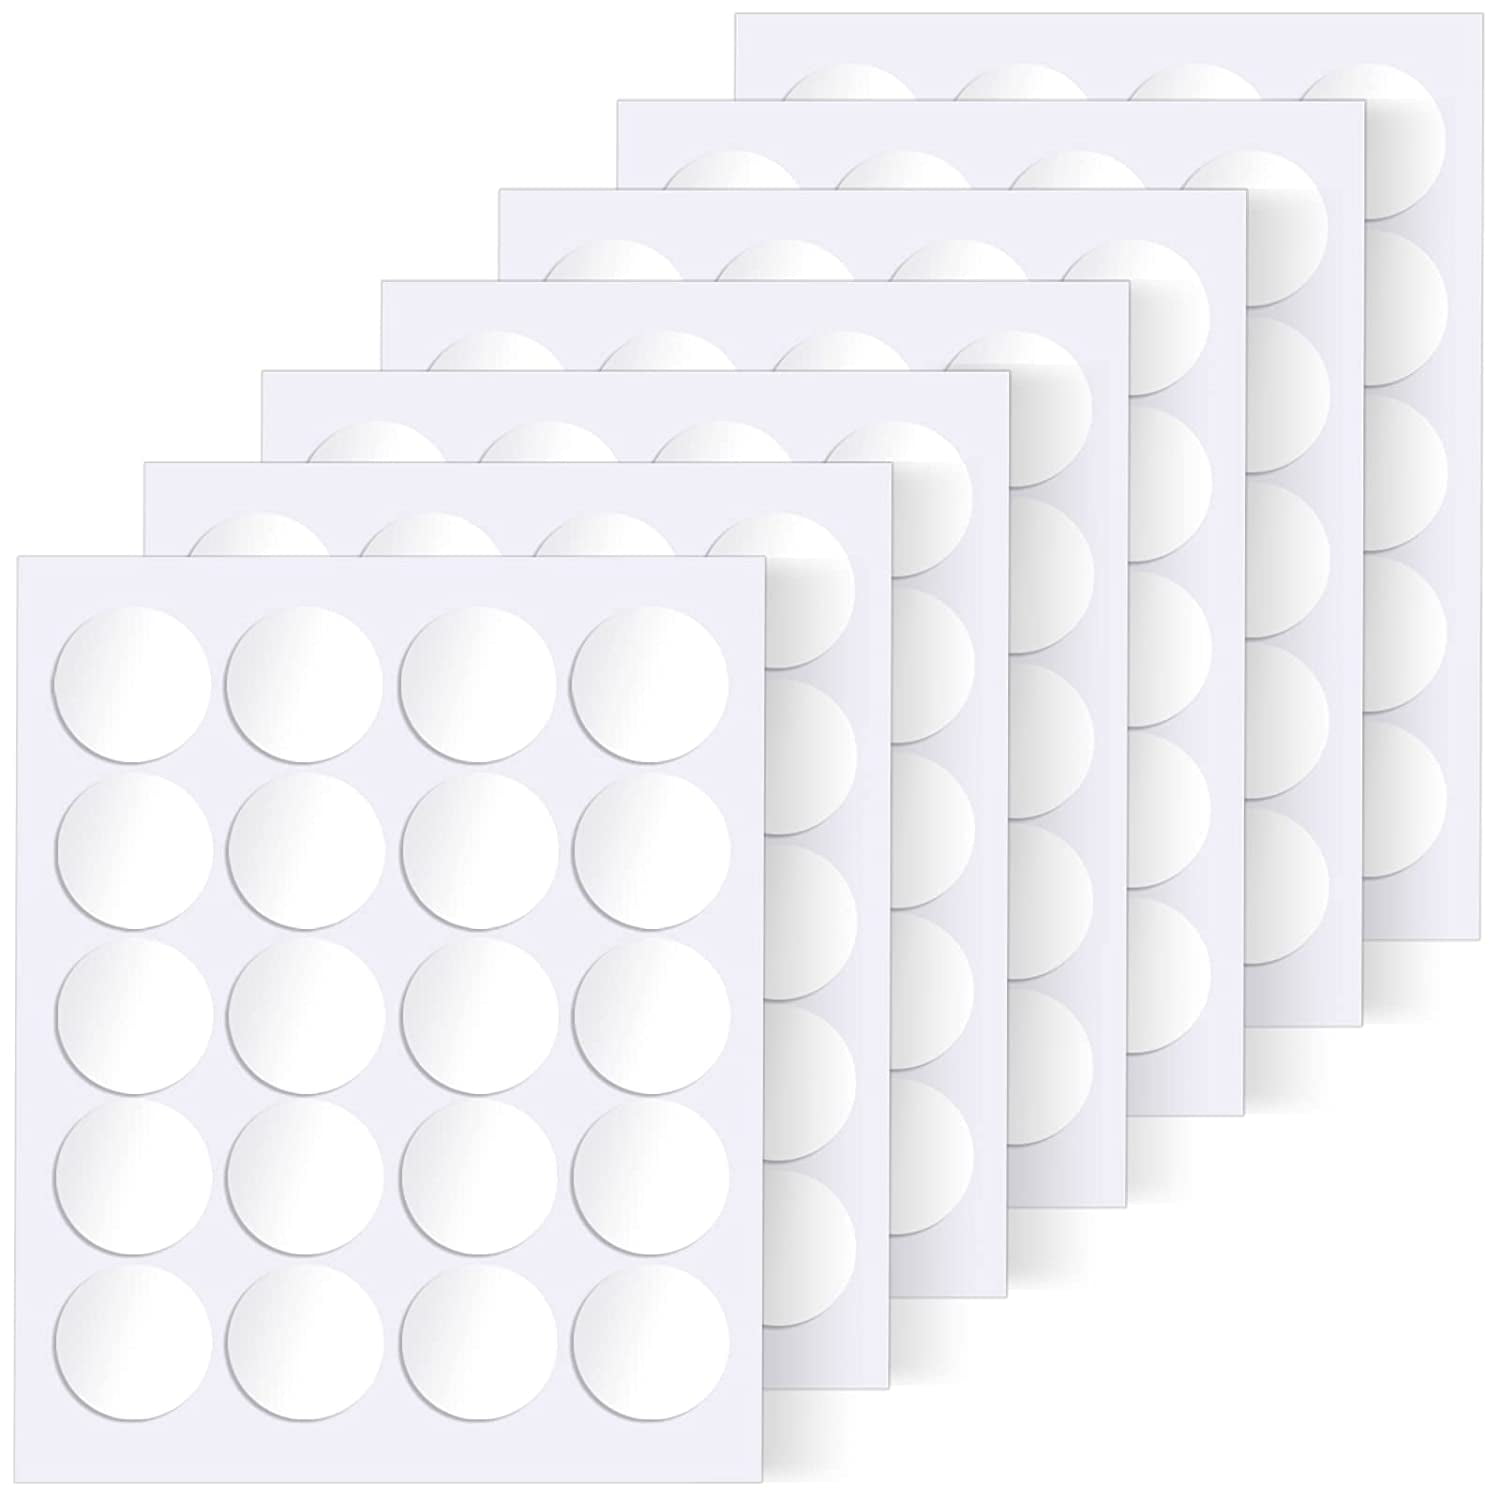 600Pcs Sticky Tack, 10mm/0.39” Removable Poster Putty, Double Sided  Removable Clear Adhesive Mounting Round Reusable Tacky Dots Transparent  Stickers Glue for Wall Hanging Pictures Posters 